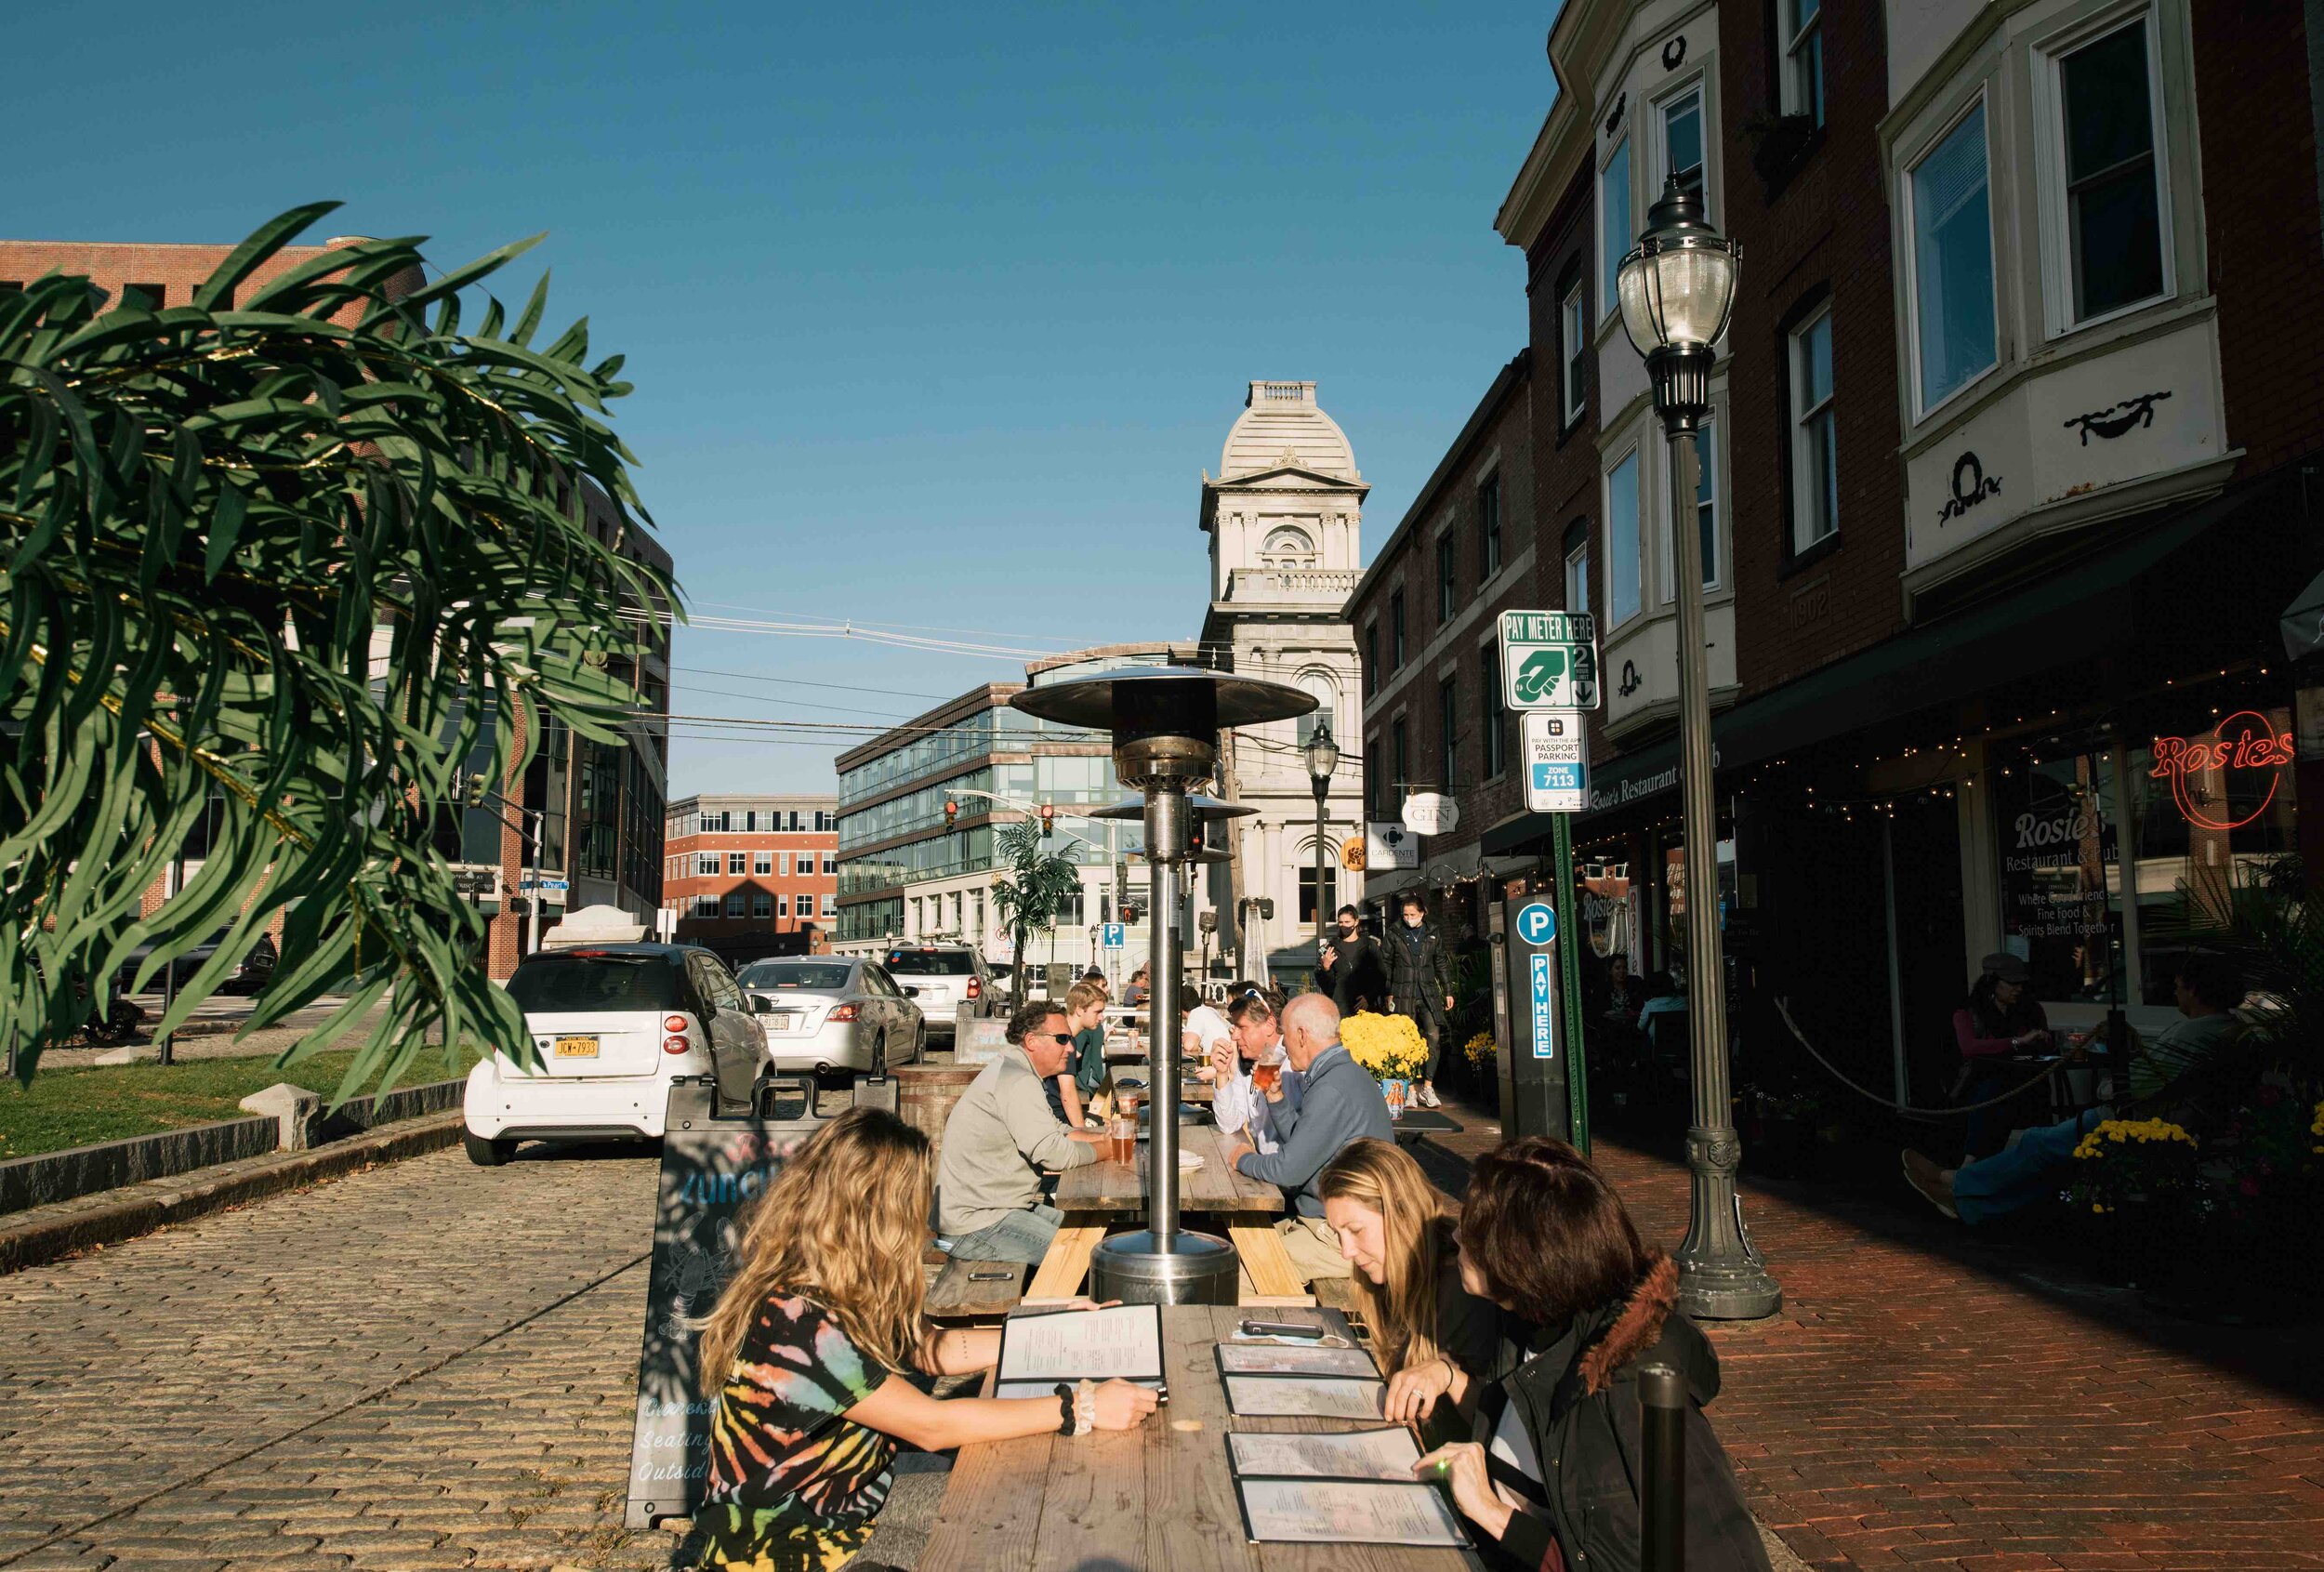  Downtown businesses have had to safely adapt during the pandemic. Many restaurateurs—and diners—hope outdoor dining stays for the long haul. 